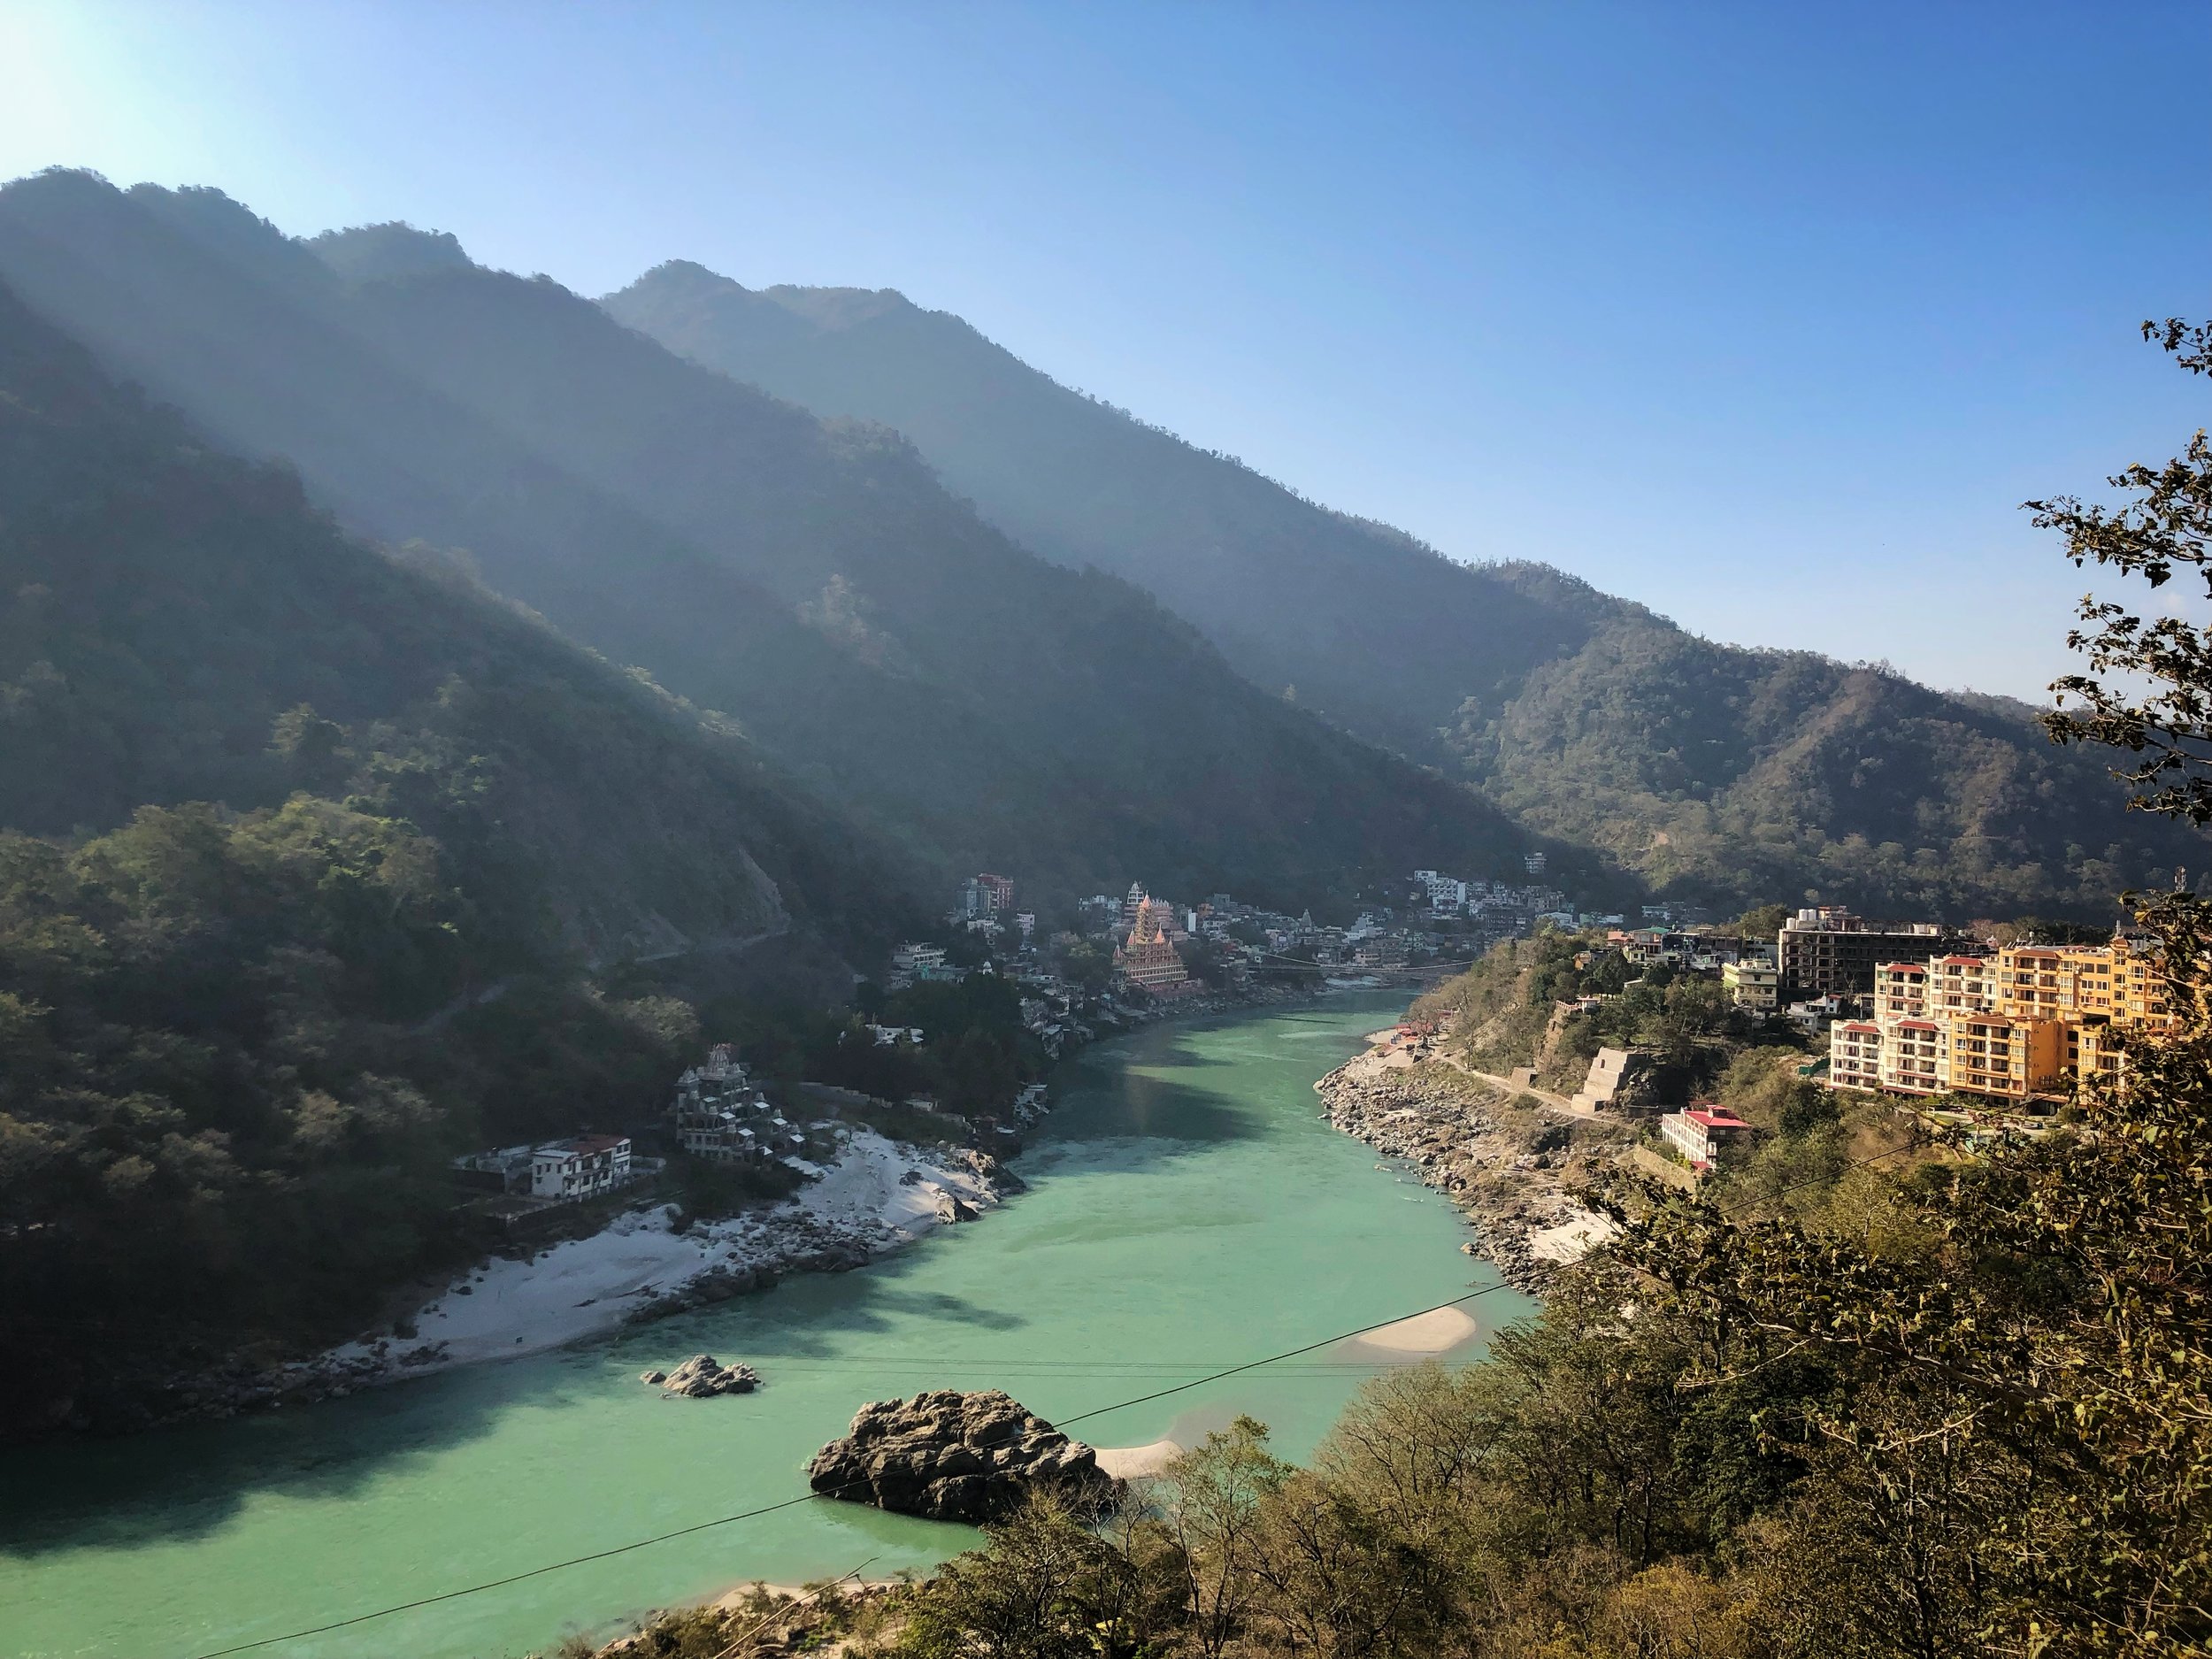 The Holy Ganges River at Rishikesh near the source of the river.